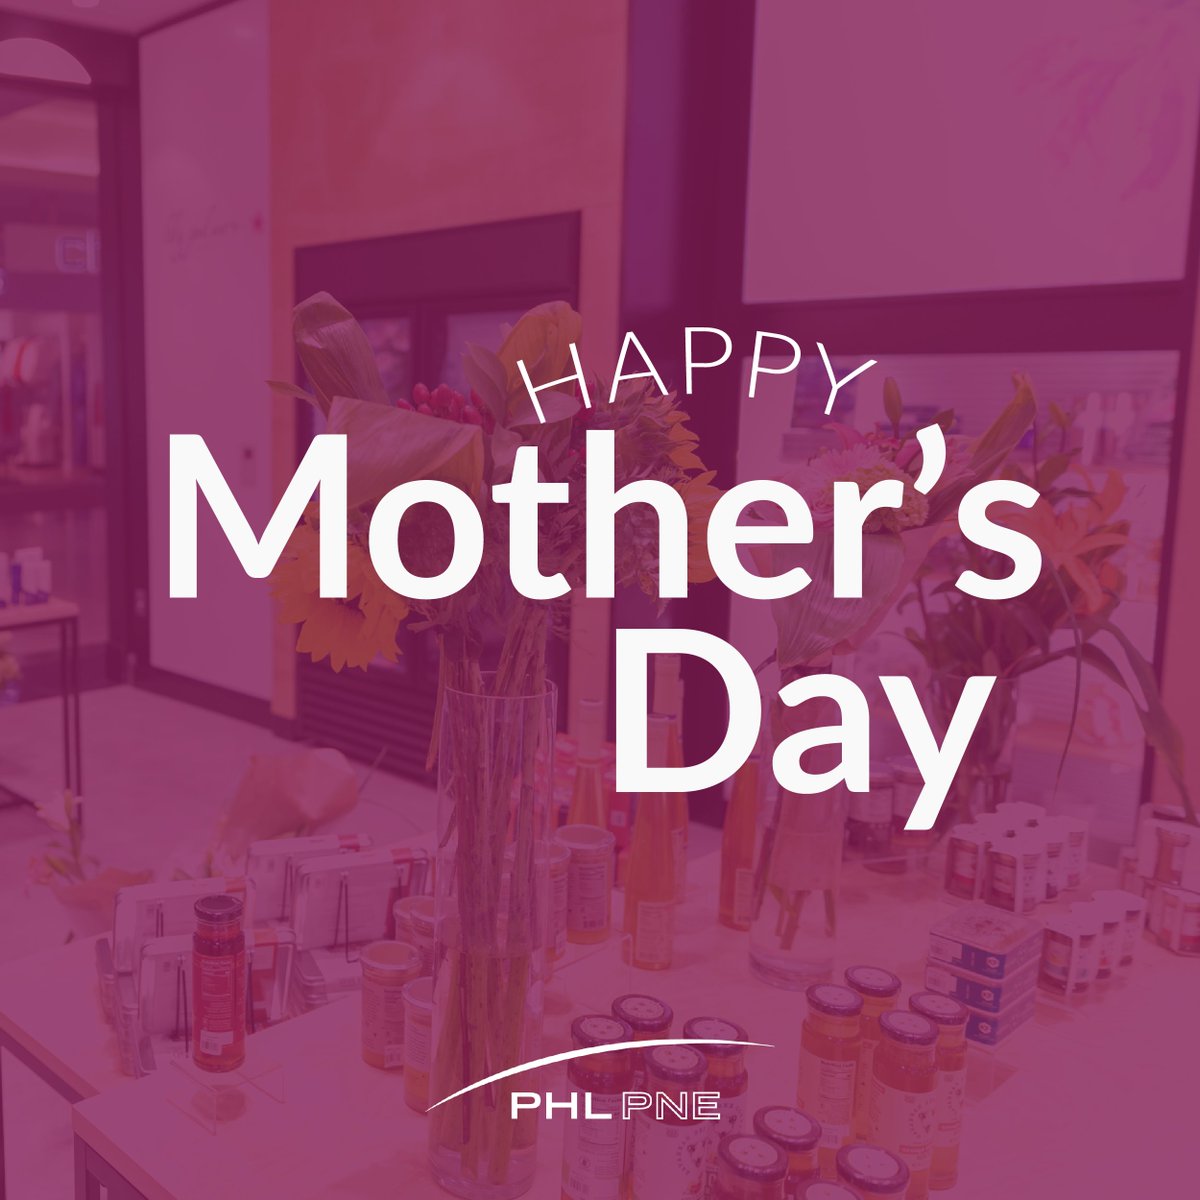 #HappyMothersDay to all moms near and far from #PHLAirport!